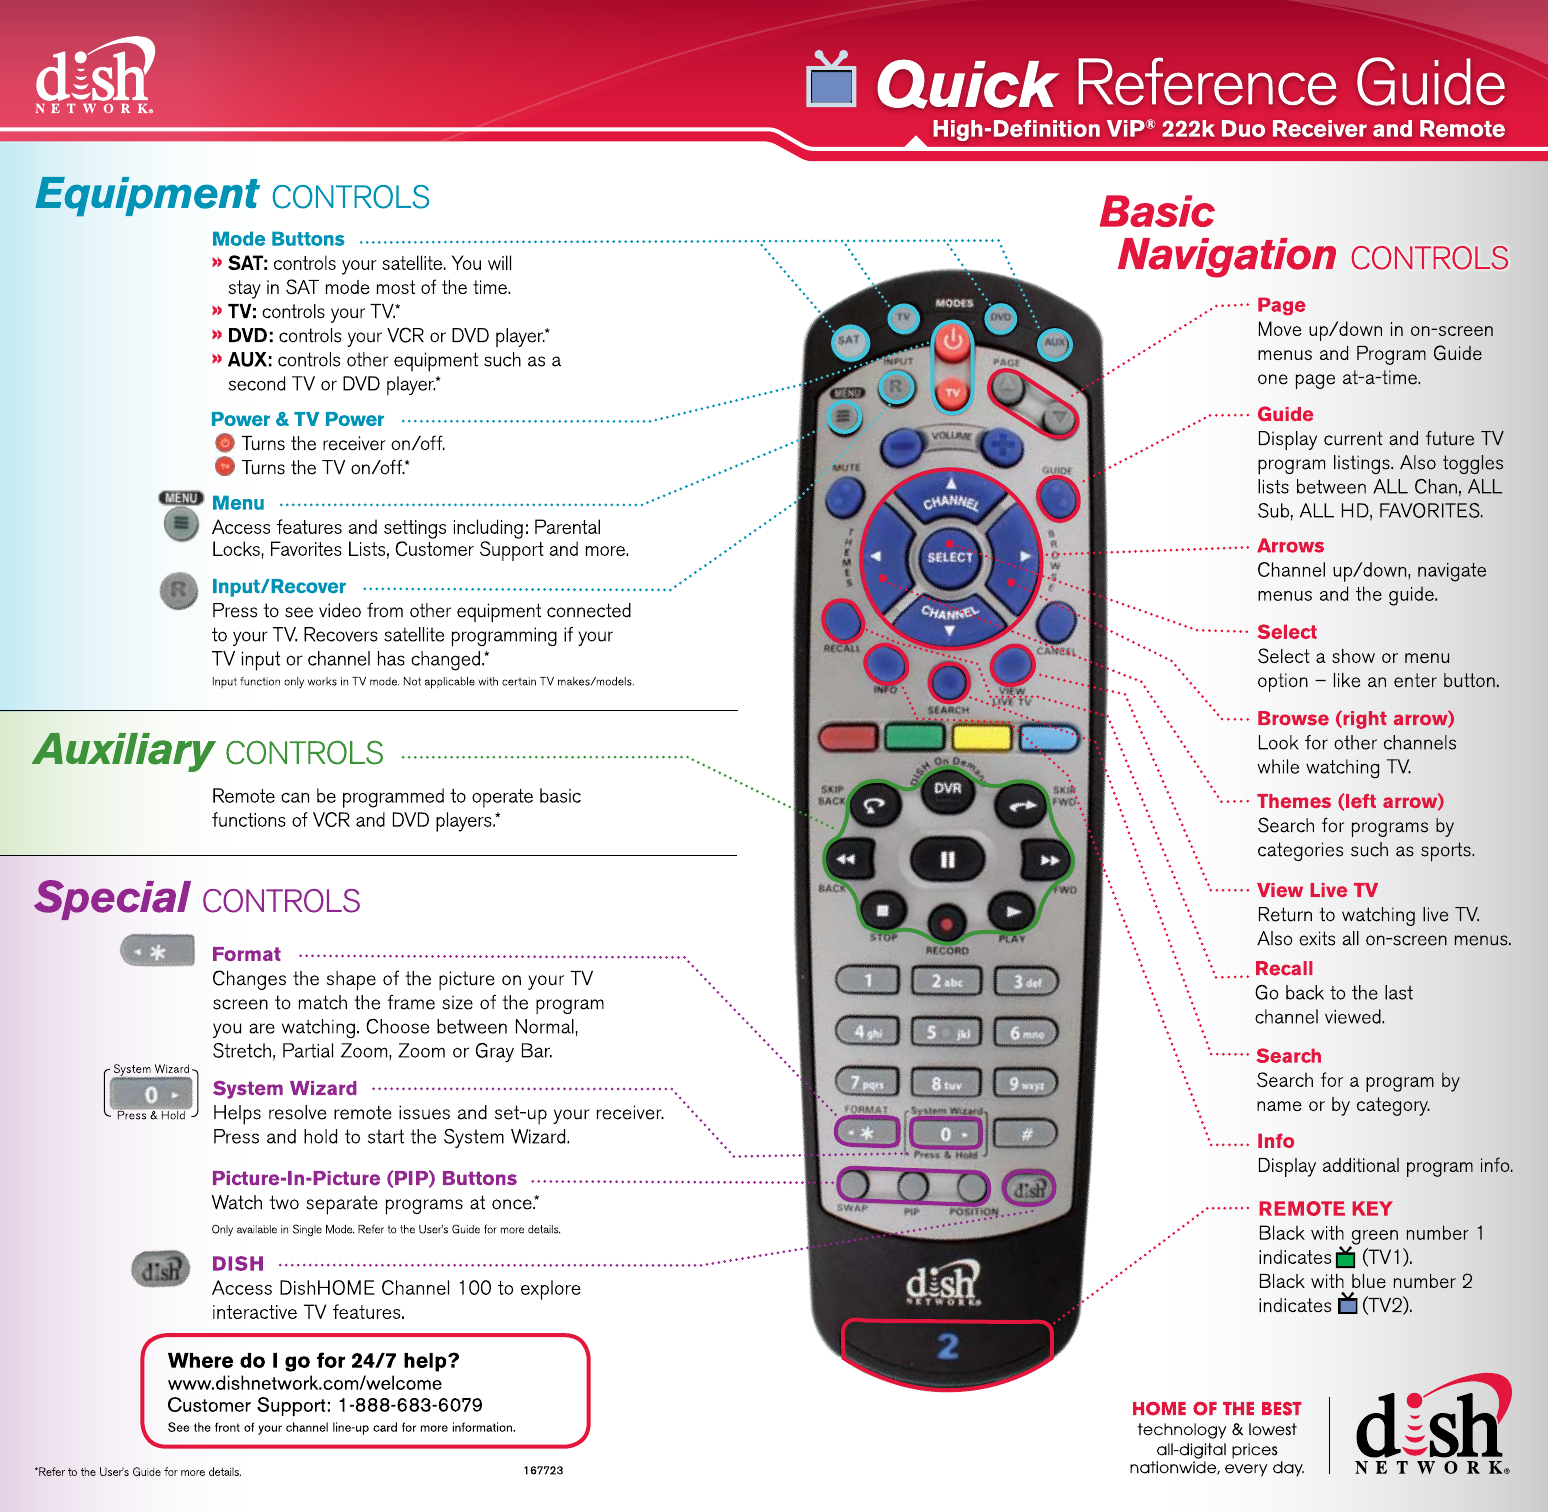 How To Program The Dish Network Remote Control